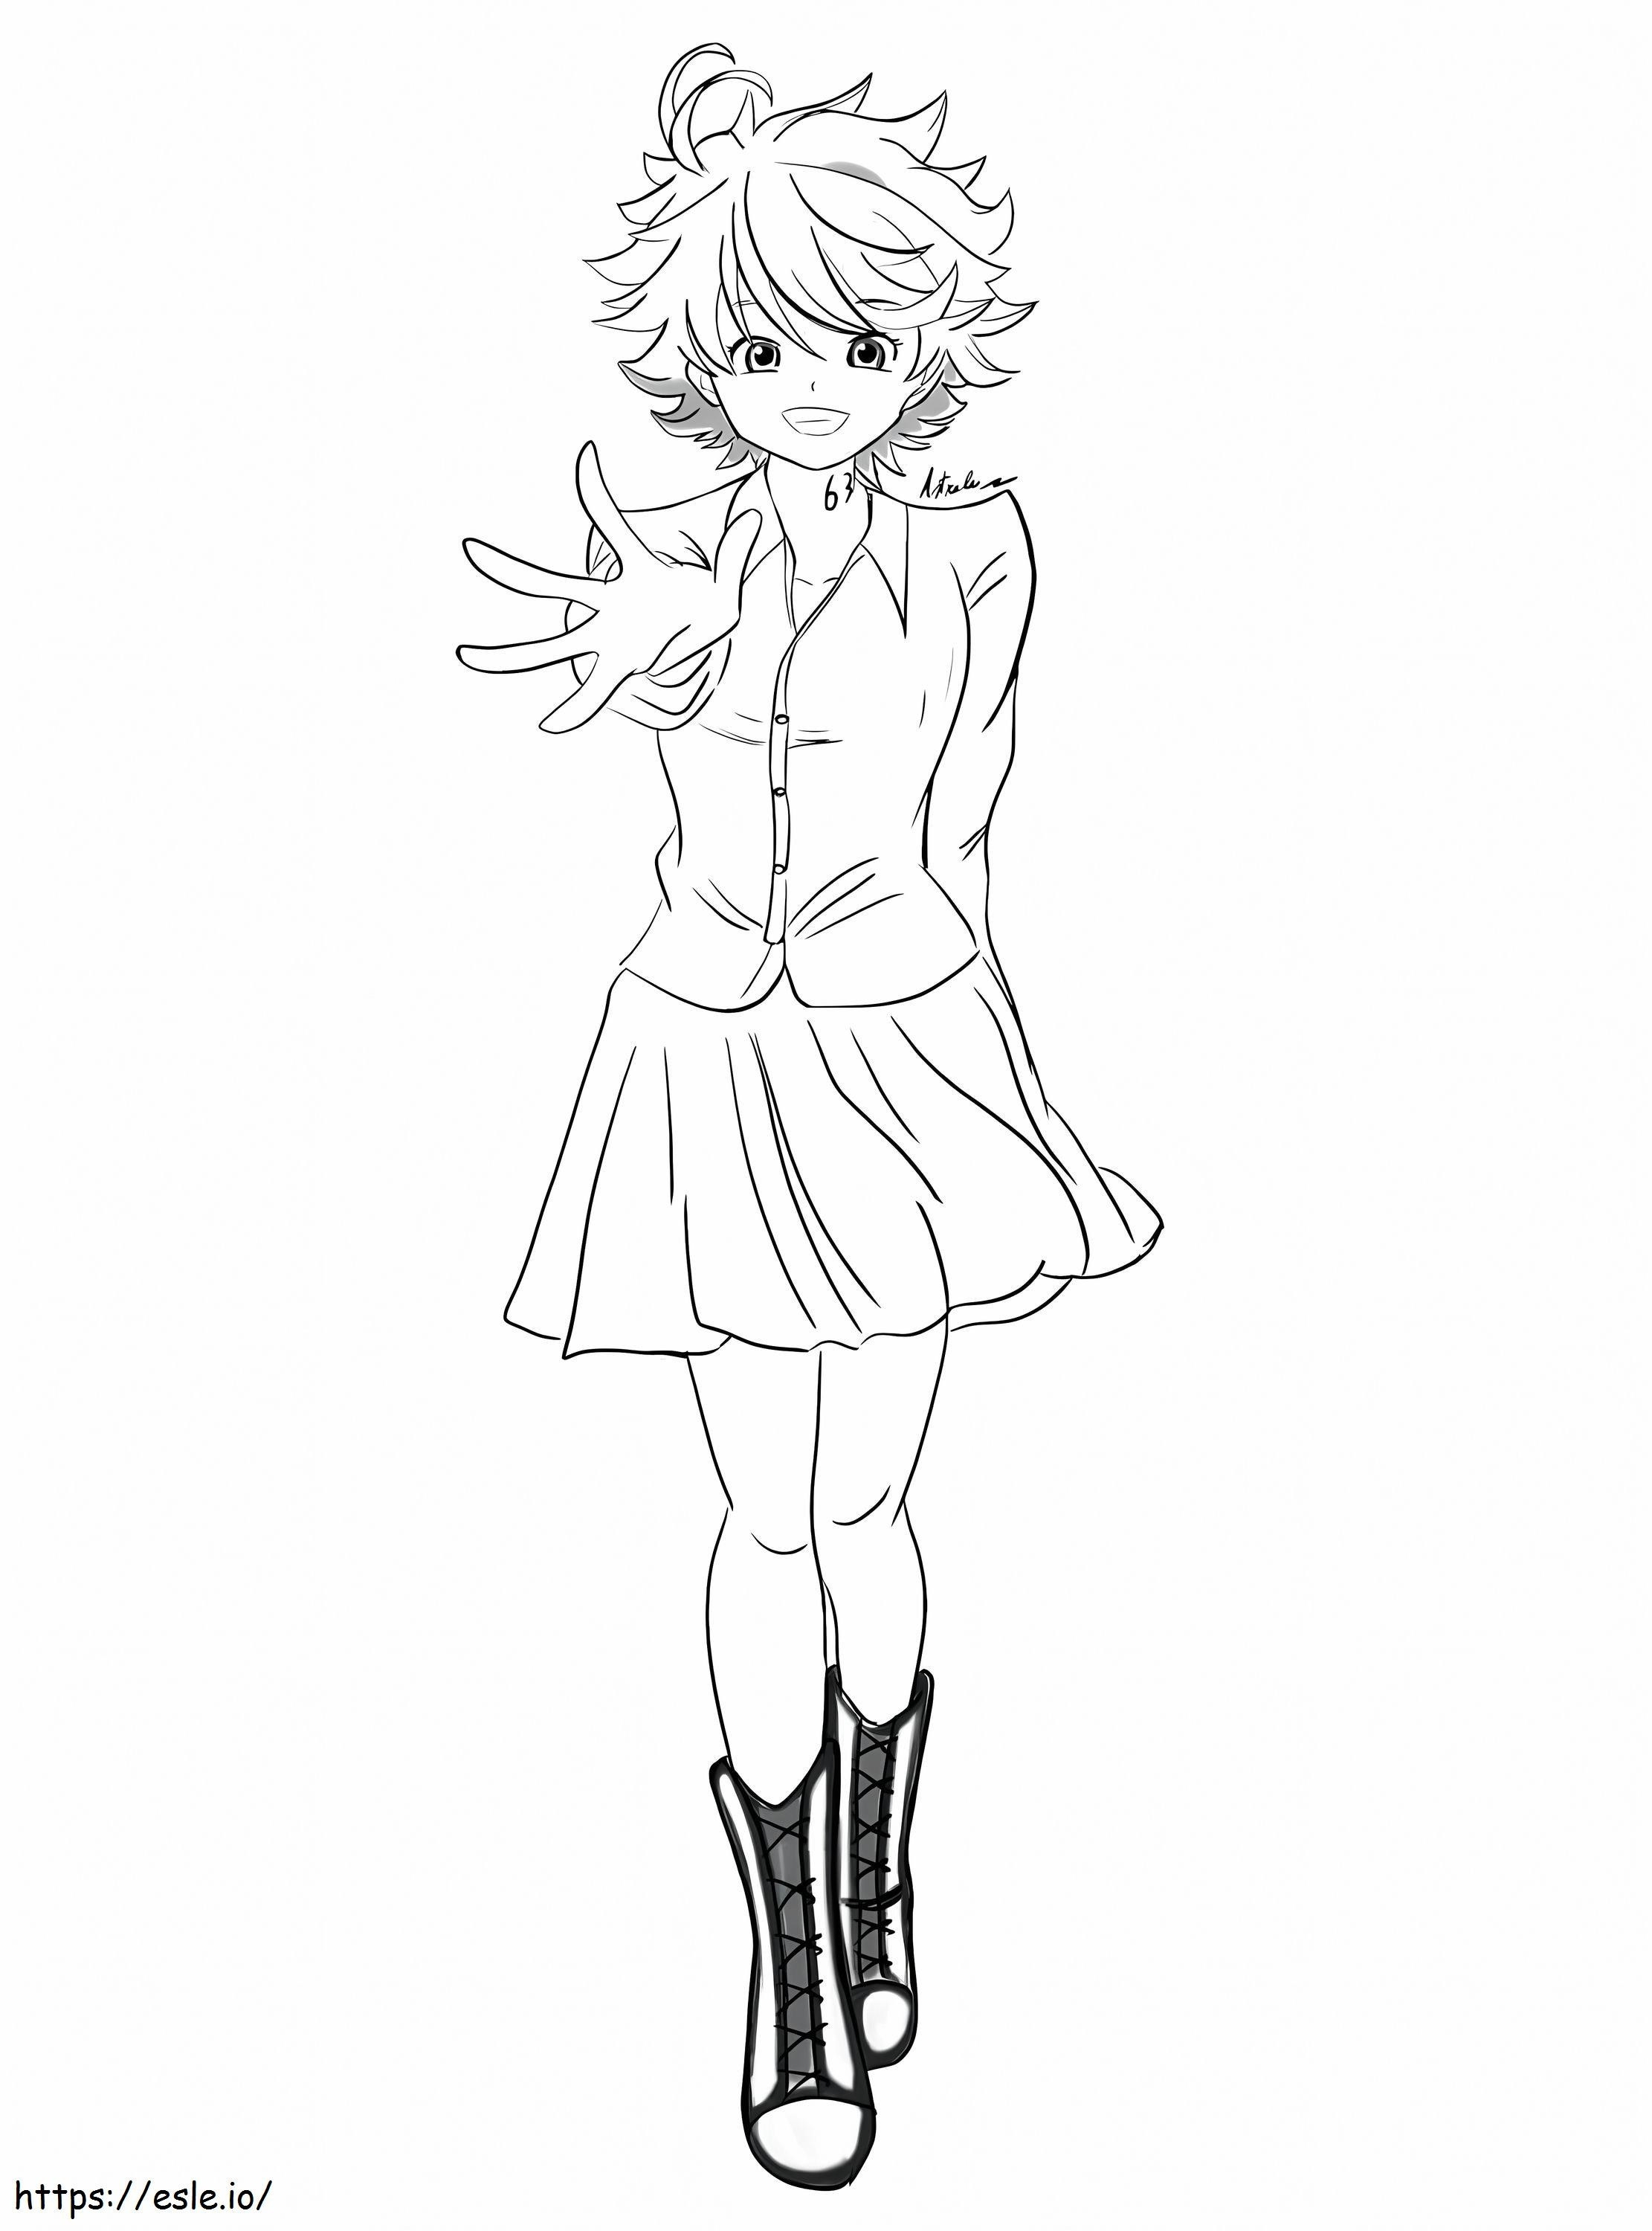 Emma From The Promised Neverland coloring page